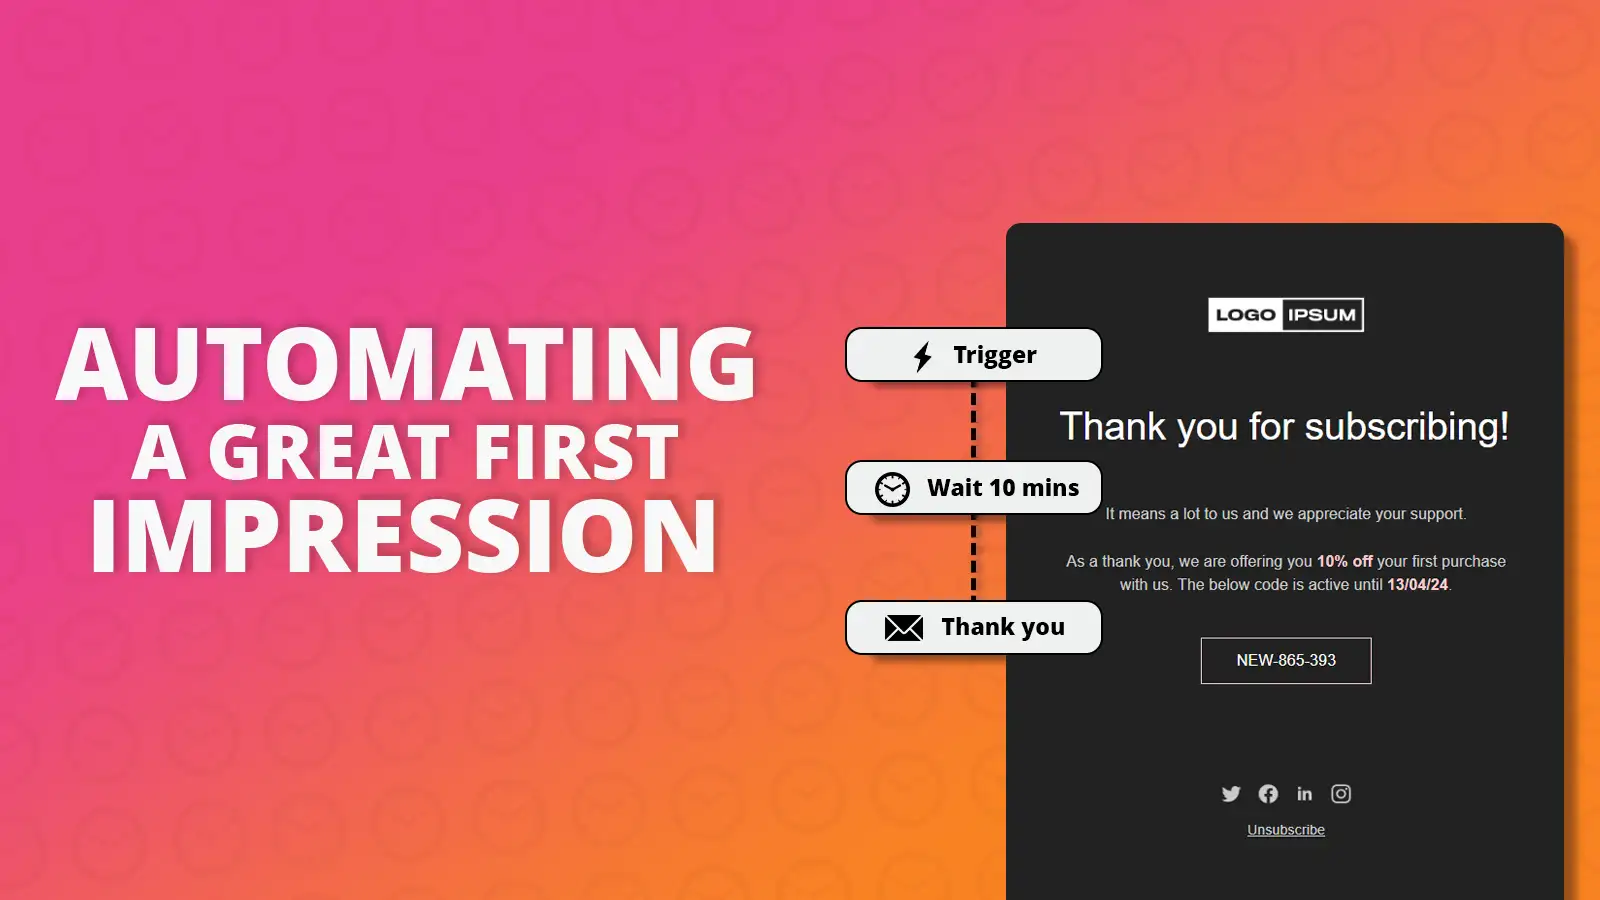 Automating a great first impression